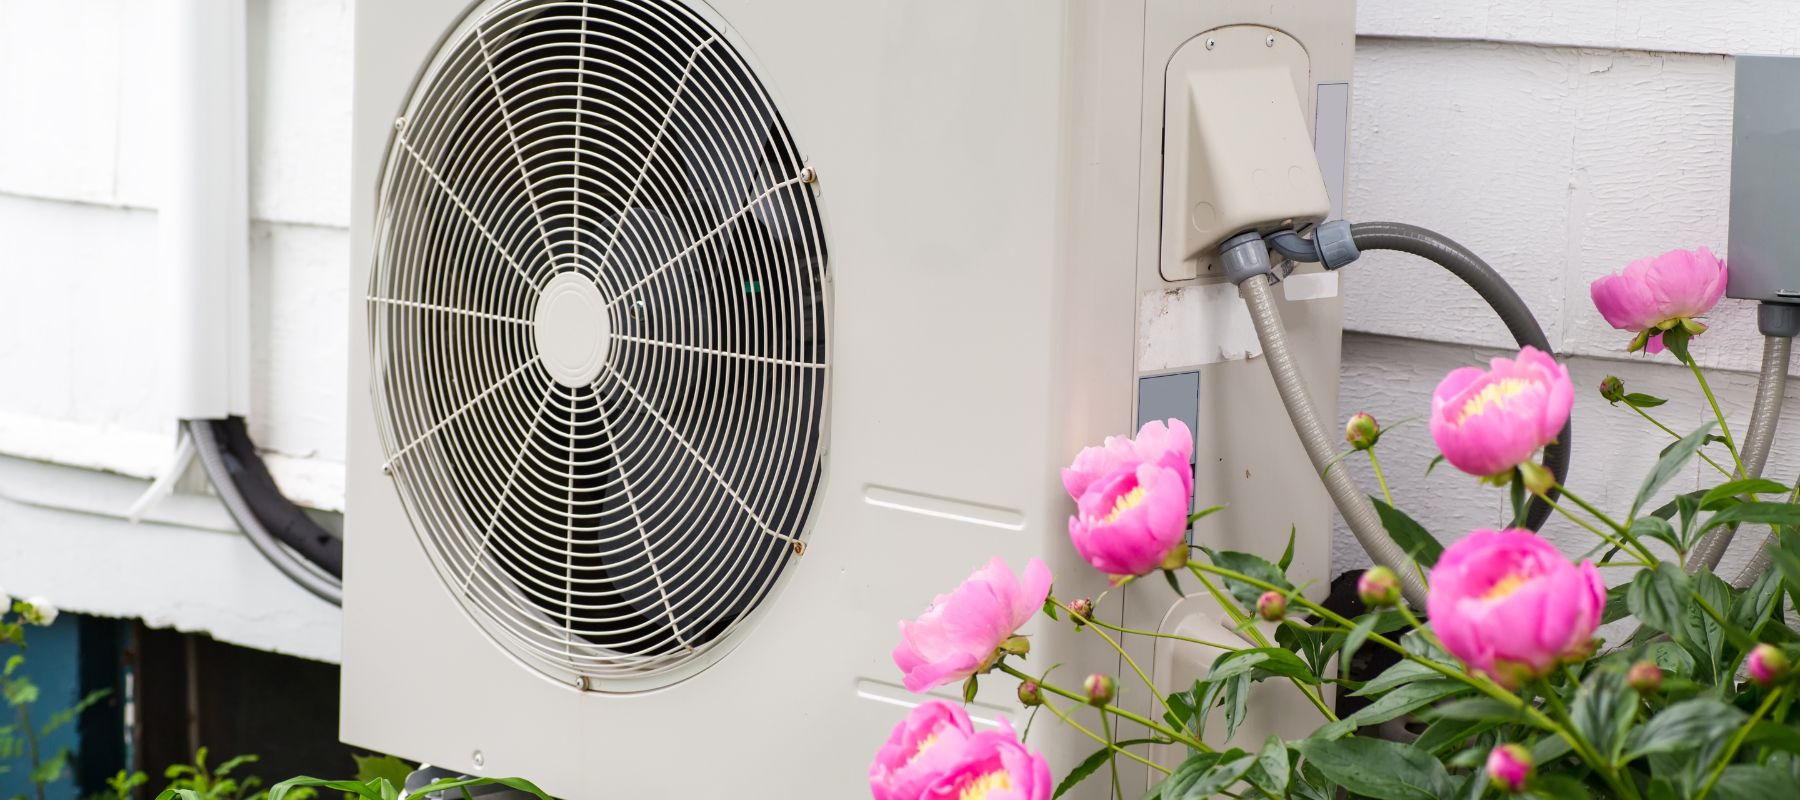 heat pump outside next to pink flowers in the garden